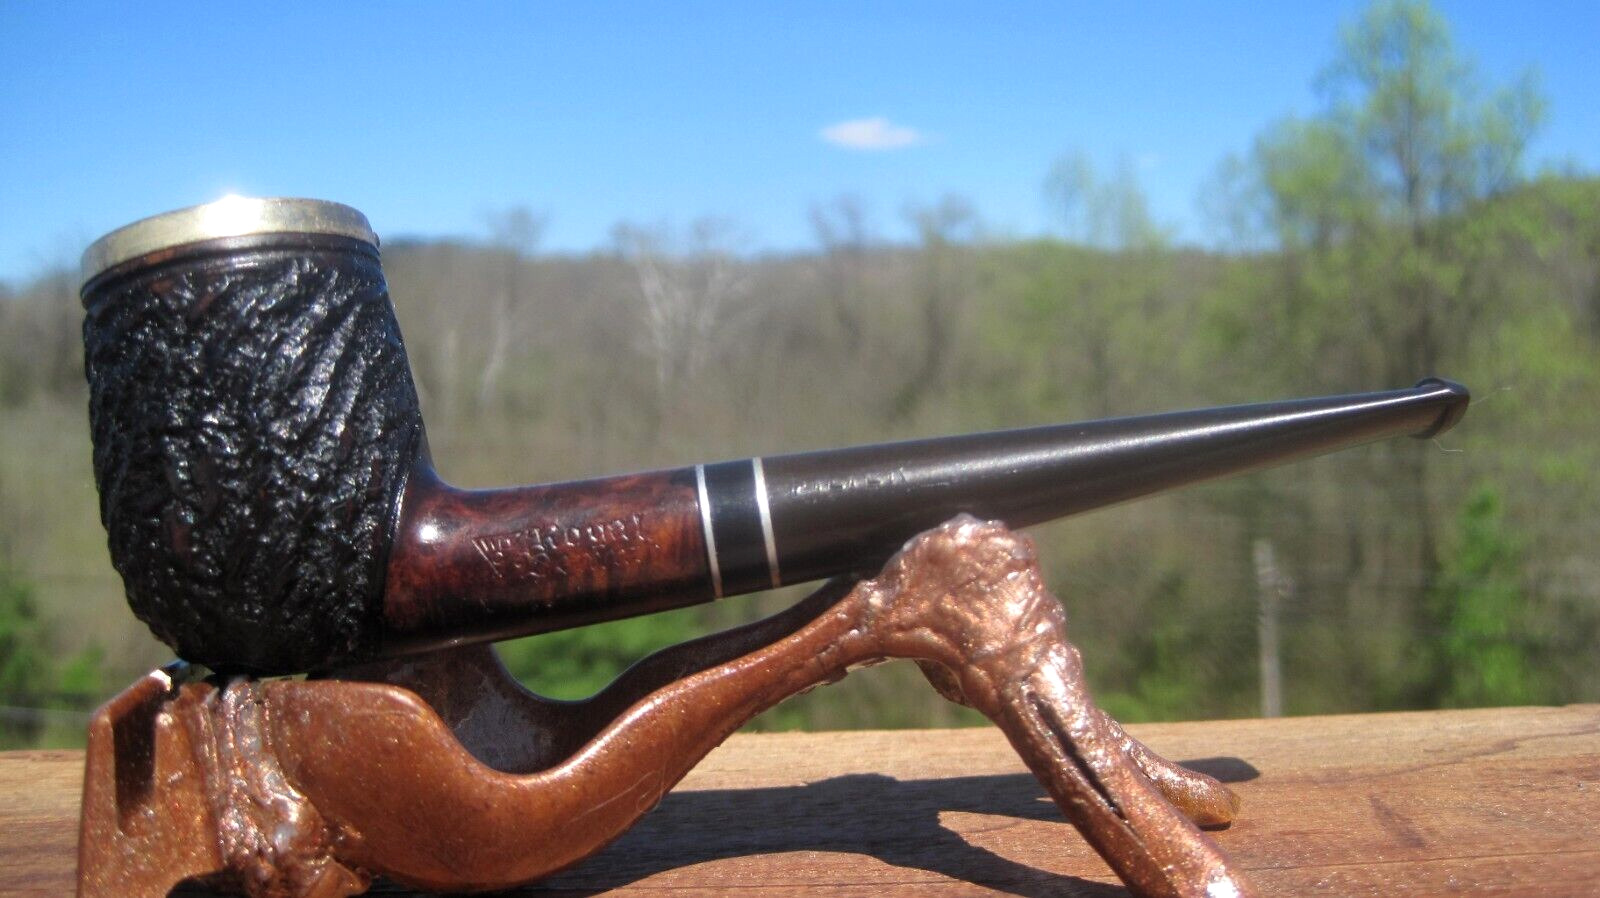 WDC Royal Demuth Filter PAT'D 1934 Imported Briar Root 69 Estate Pipe Vintage